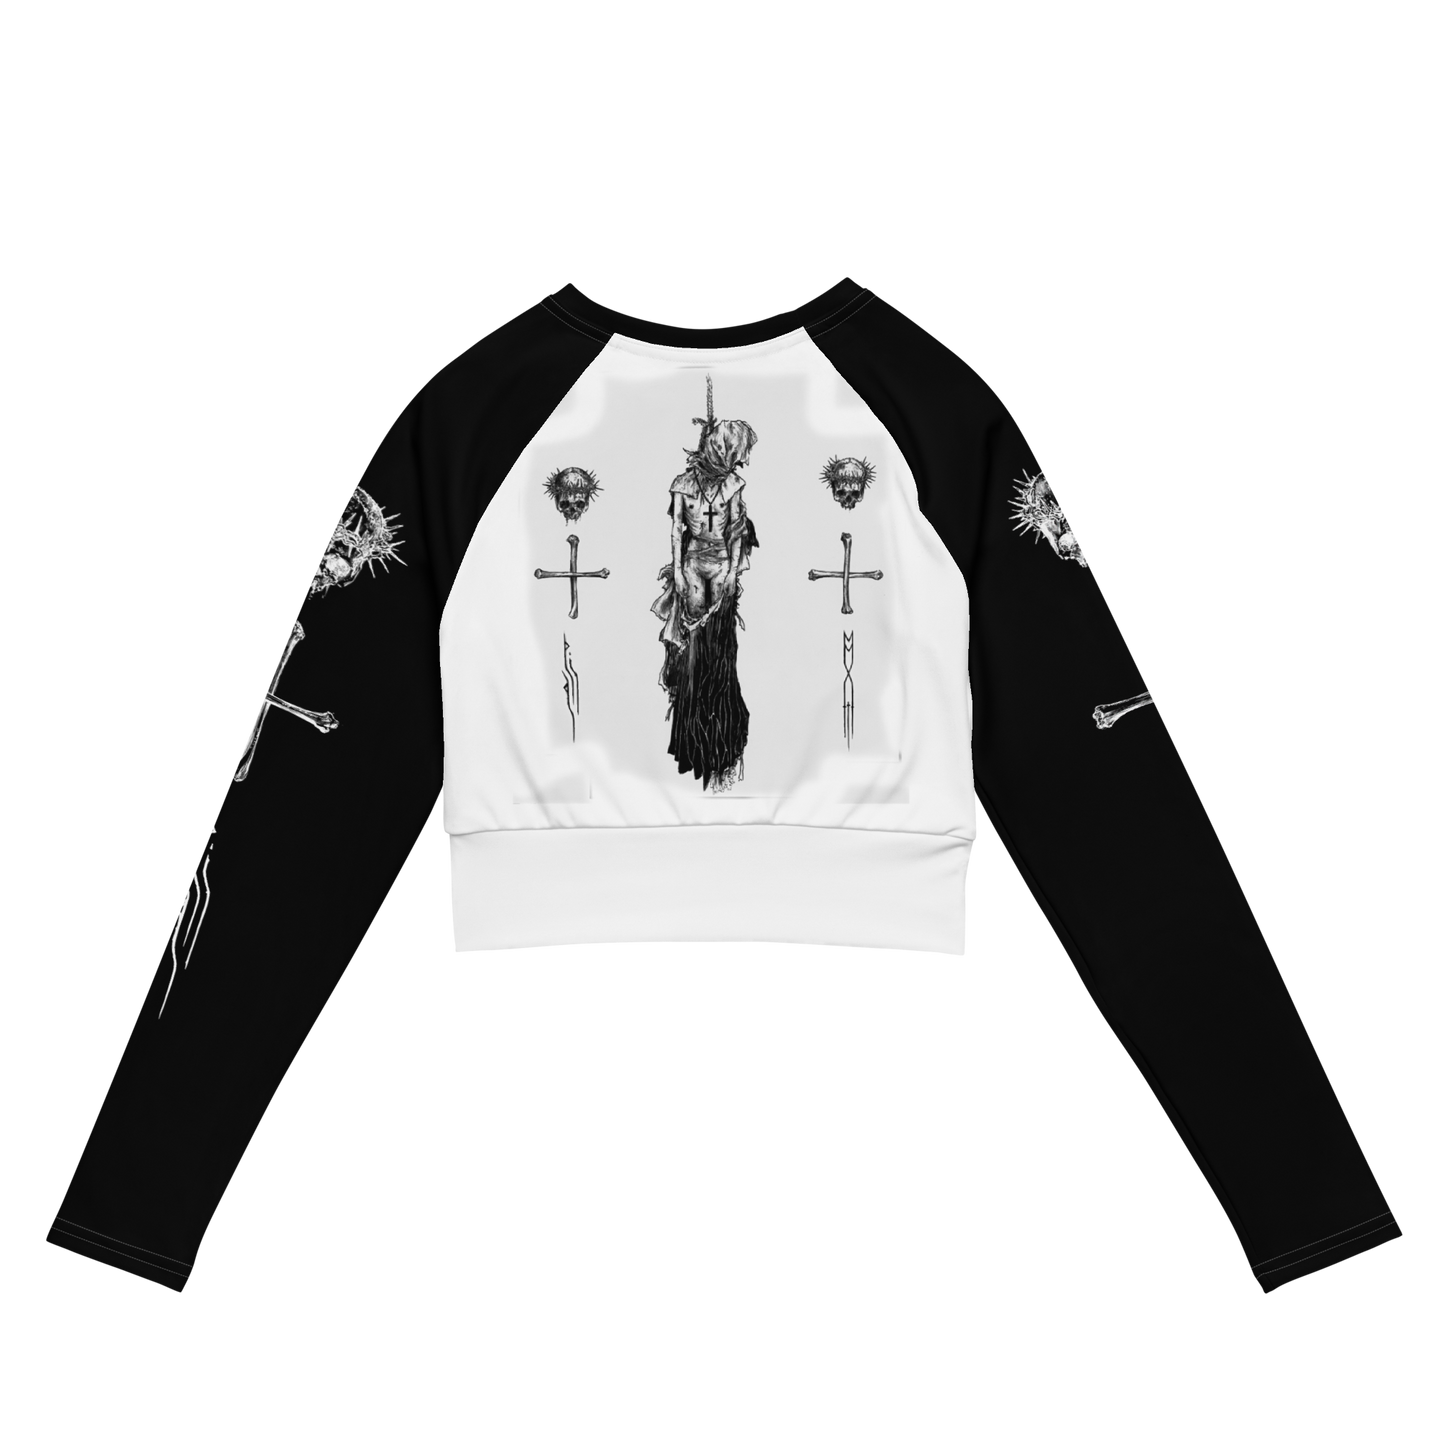 Nunslaughter Angelic Dread official long sleeve crop top with black sleeves by Metal Mistress